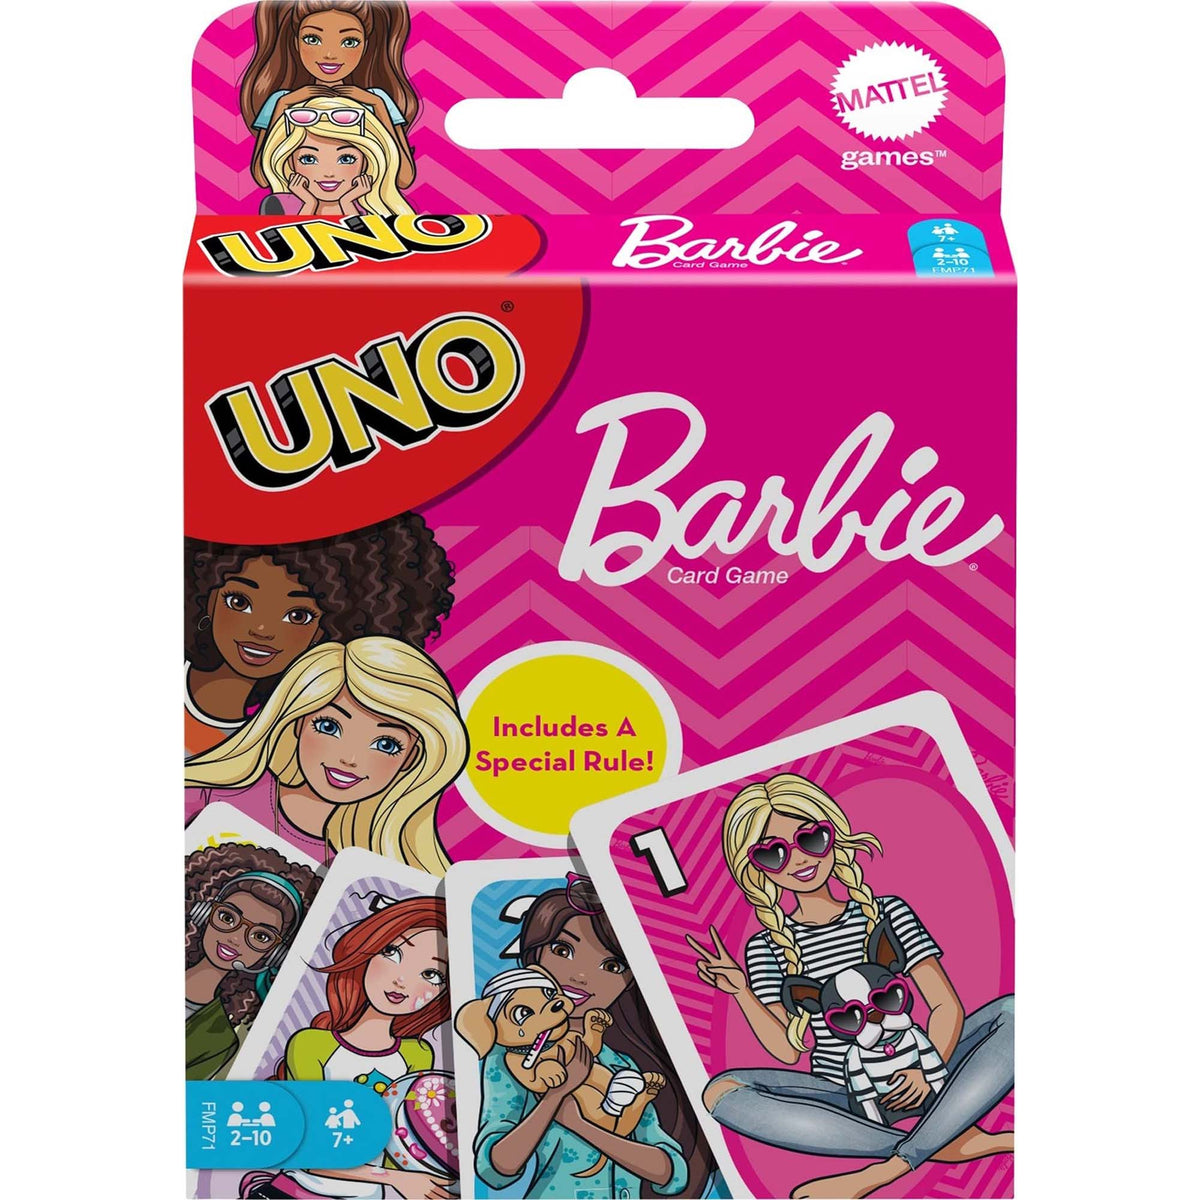 JOUET K.I.D. INC. Toys & Games Uno Card Game Barbie Movie Edition, 1 Count